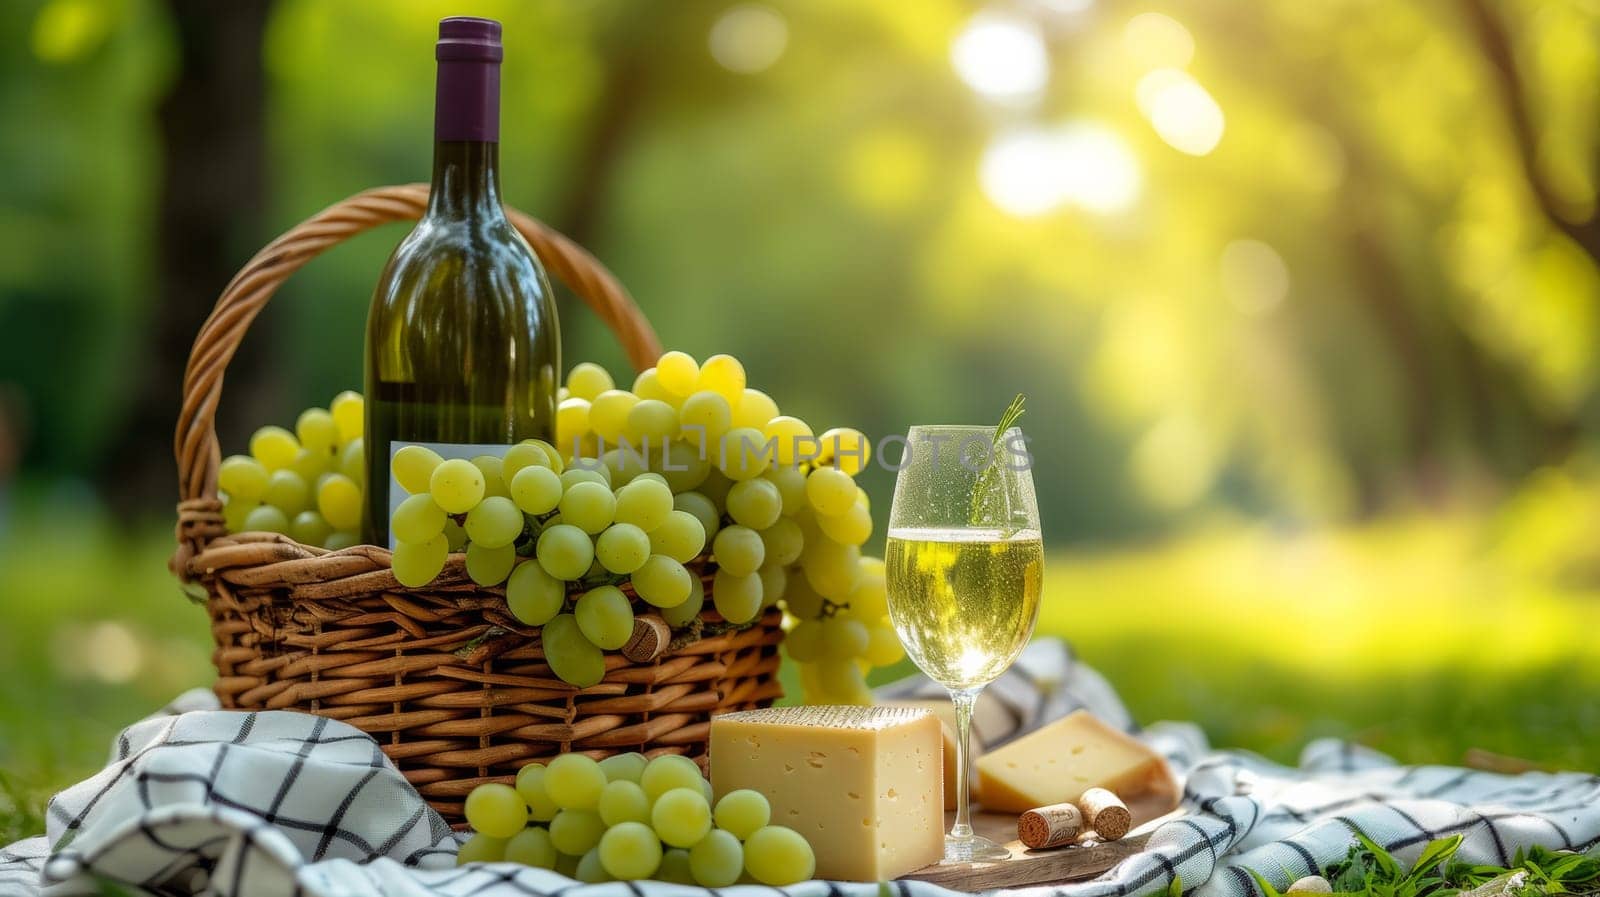 A basket of grapes and cheese on a blanket with wine